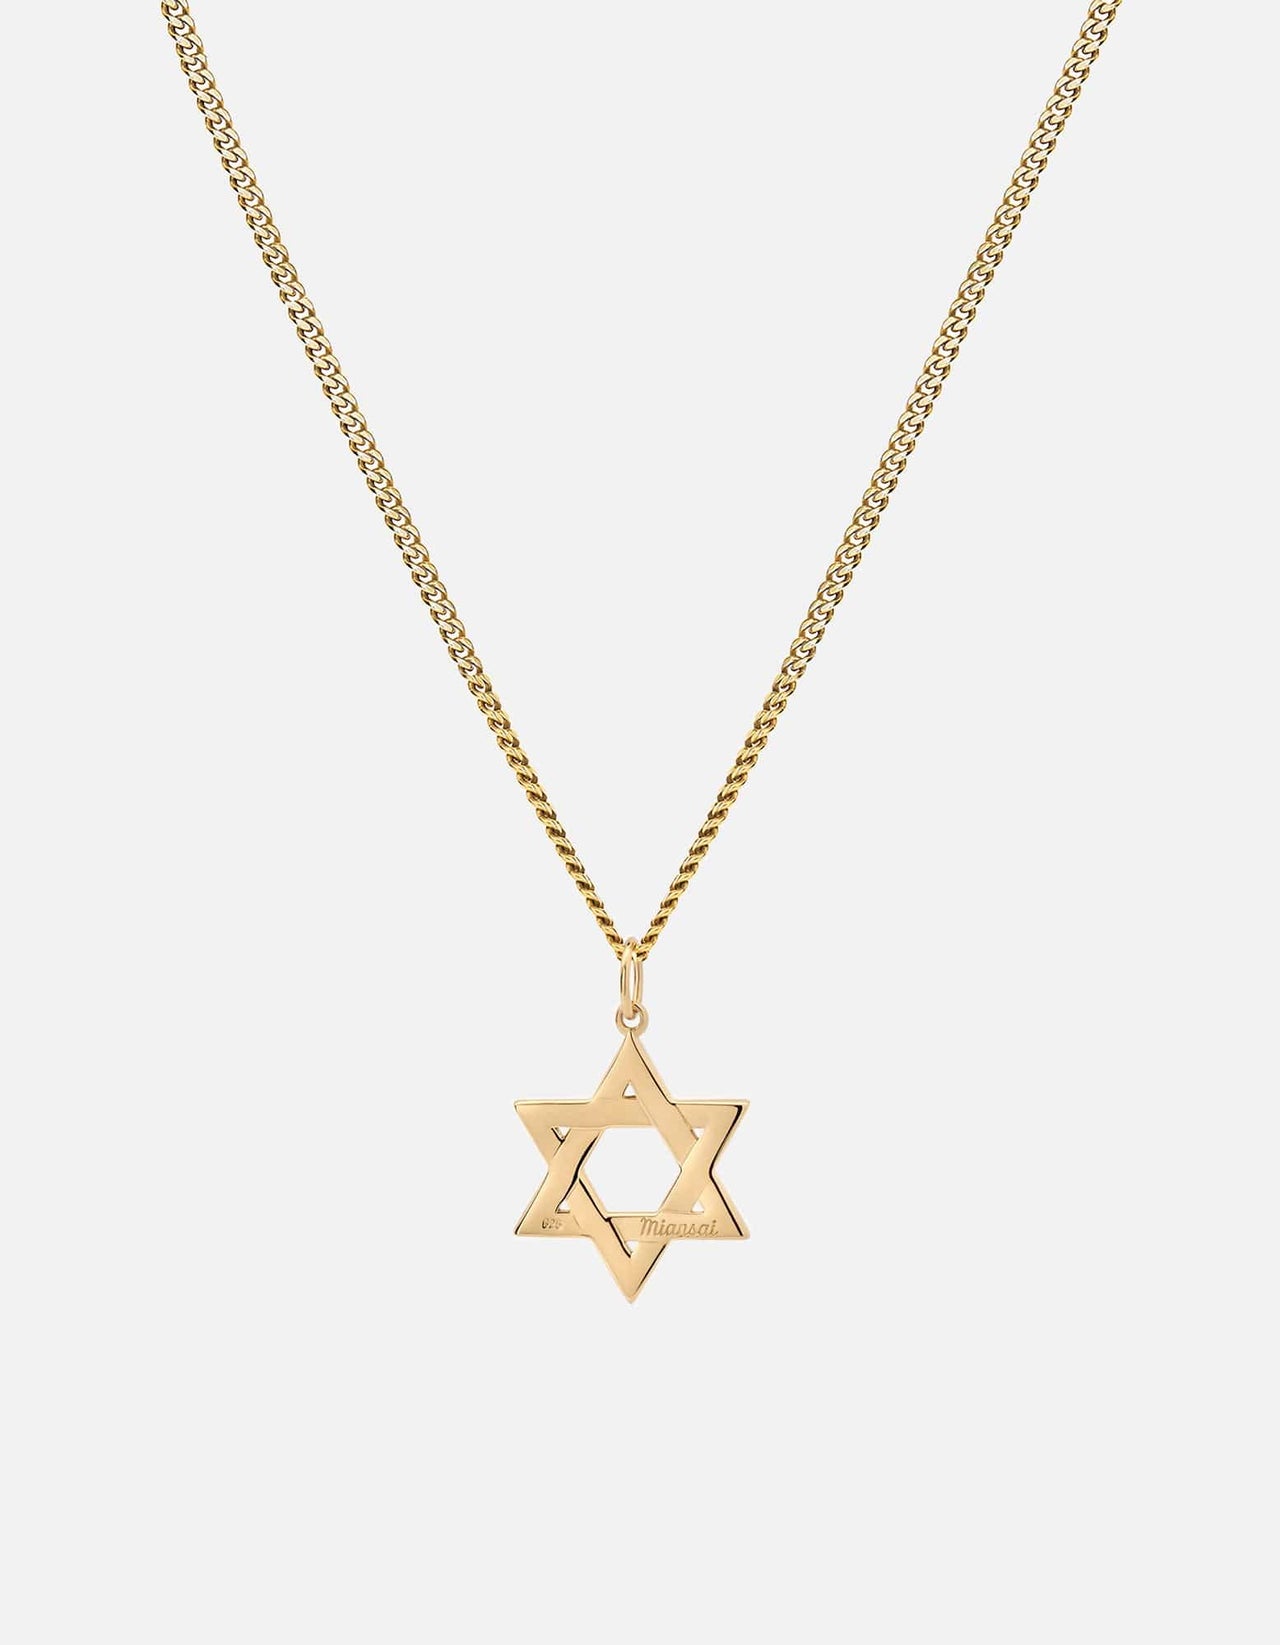 Star of David I Necklace, 14k Yellow Gold | Men's Necklaces | Miansai